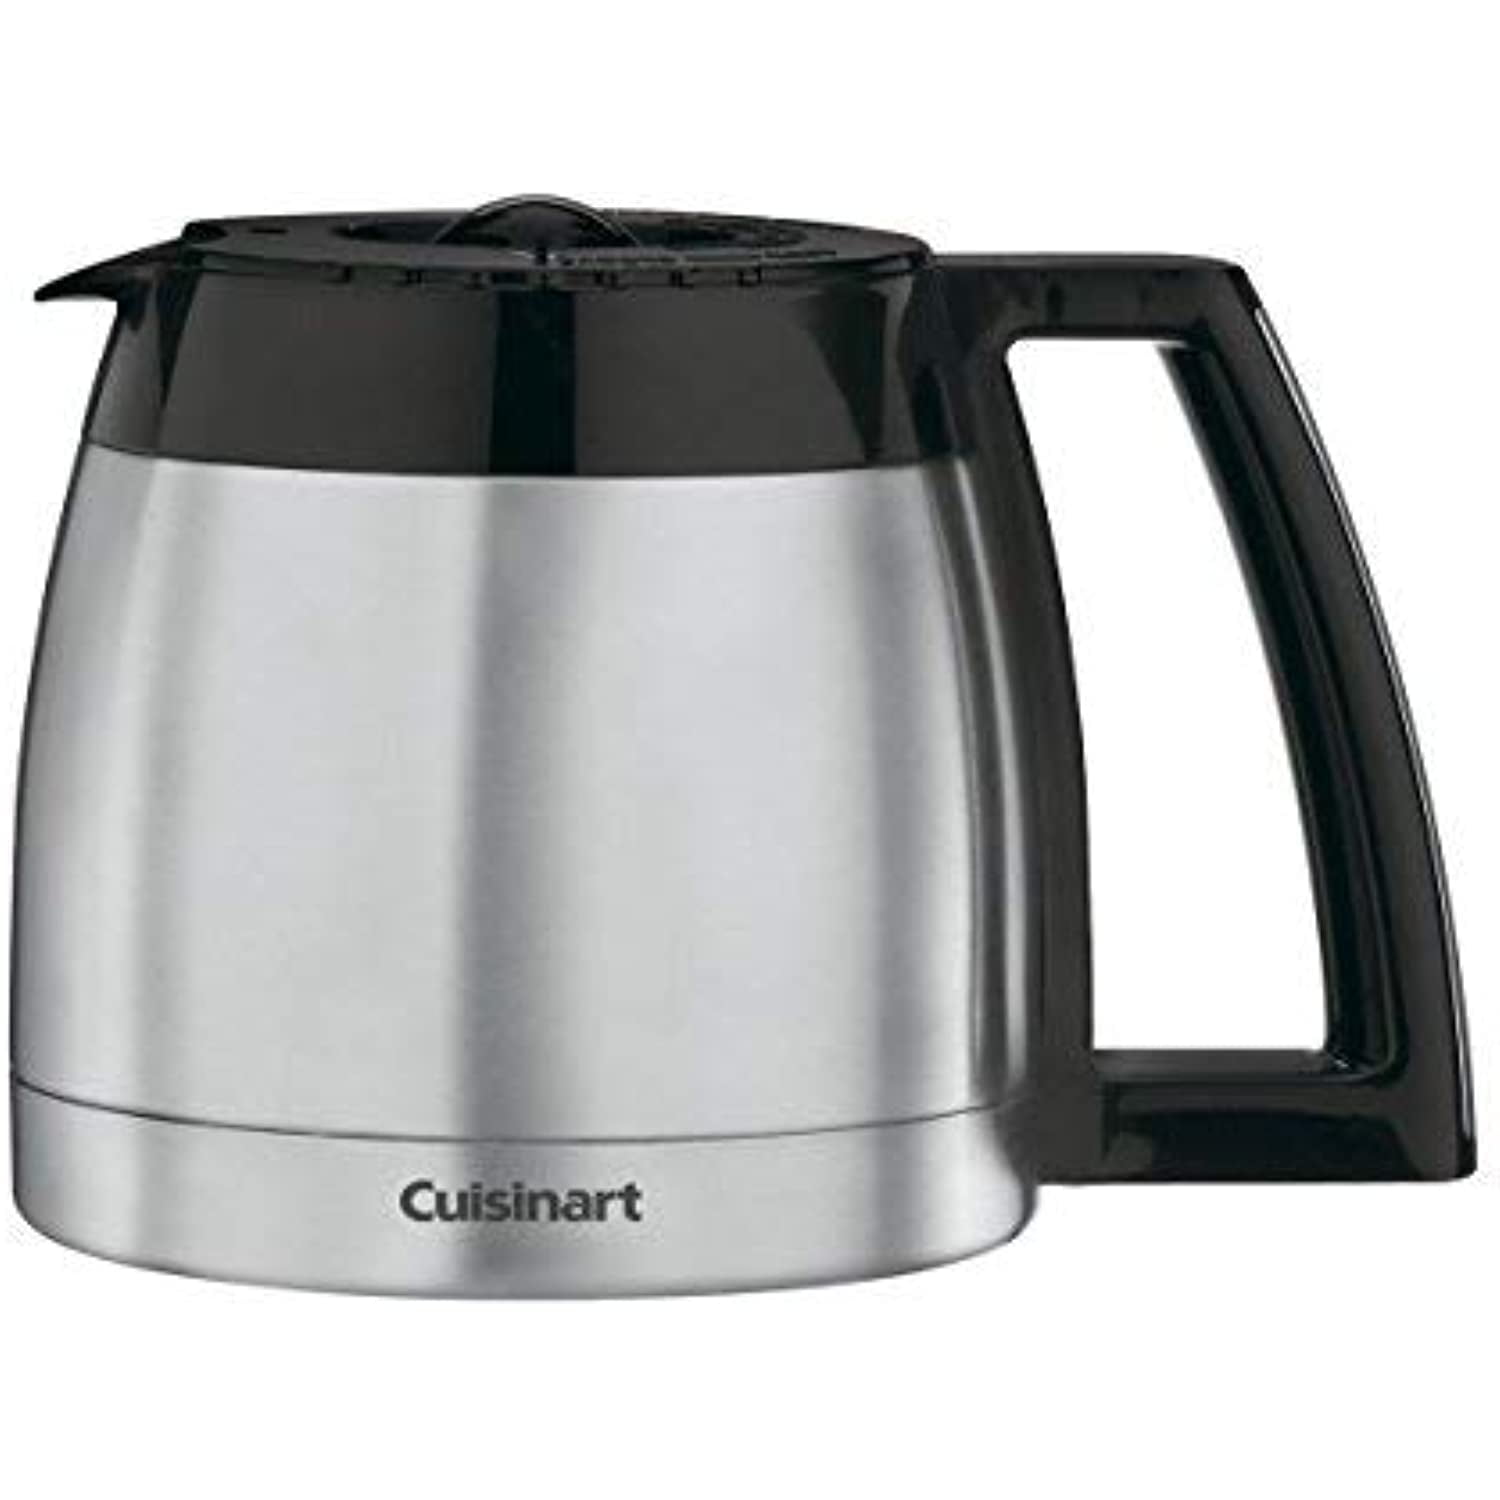 Cuisinart Burr Grind & Brew 12-Cup Coffee Maker Black/Stainless